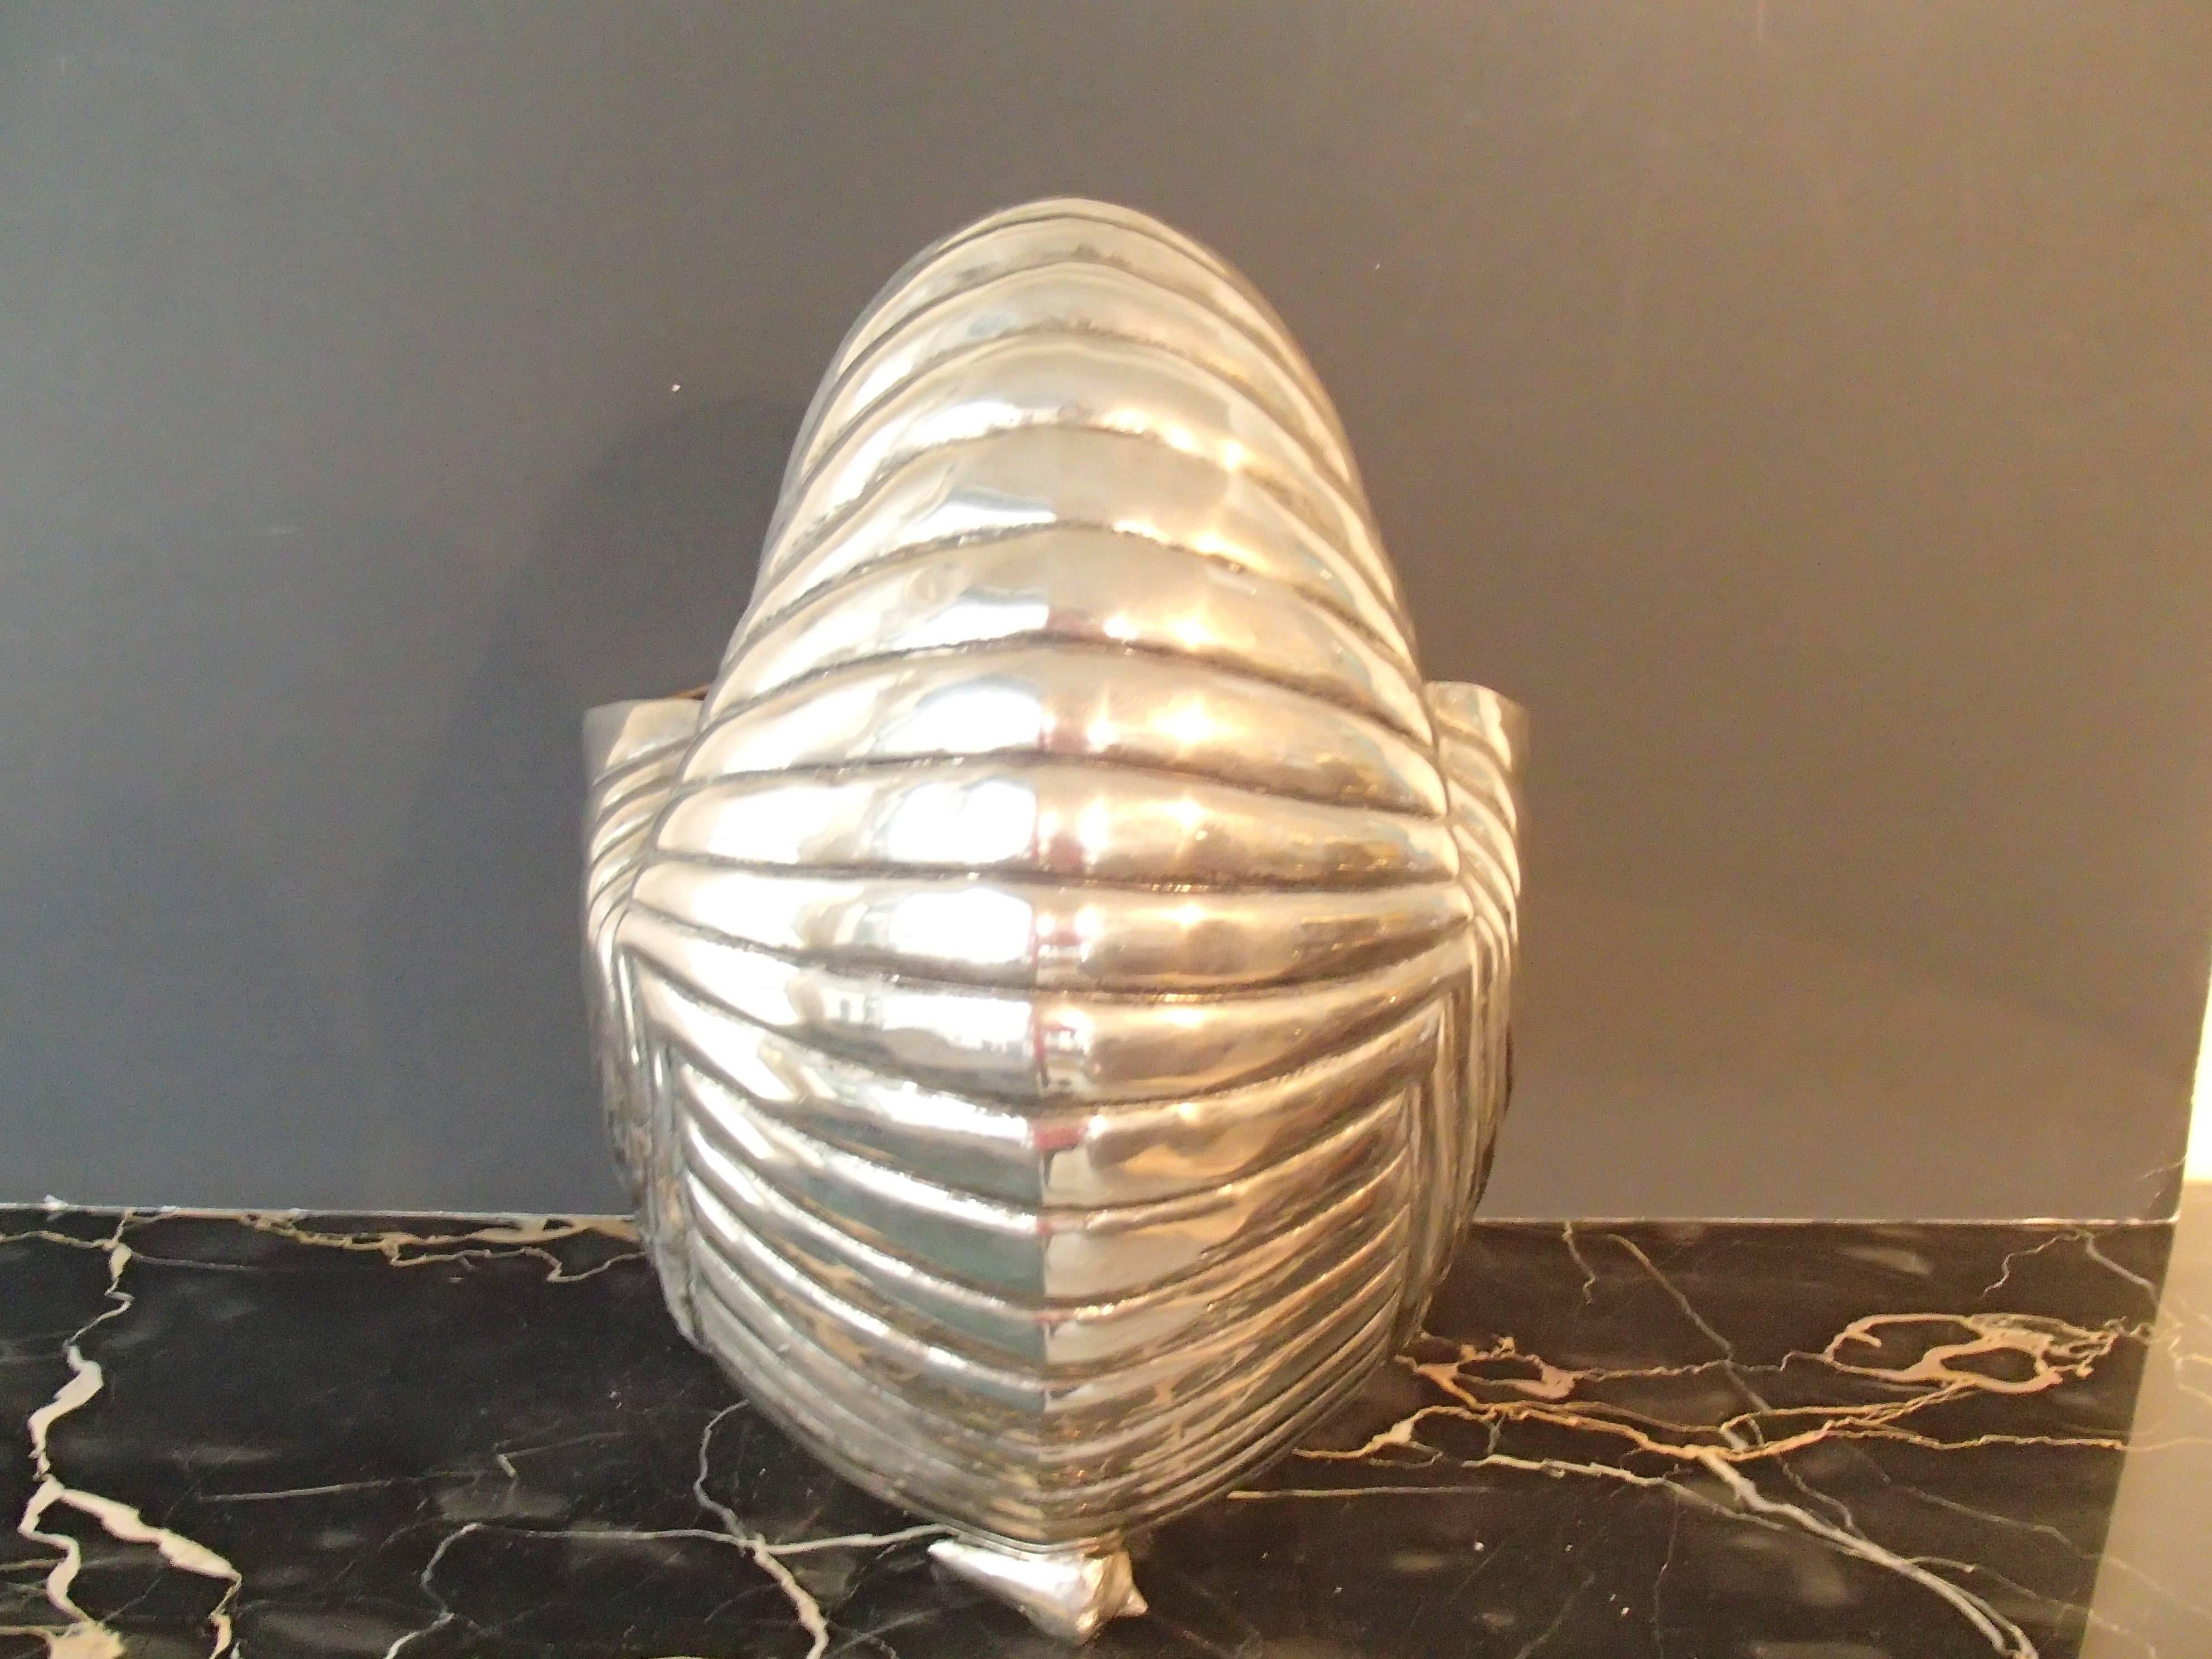 Late 20th Century Modern Champagne or Vine Cooler like a Shell Seen in 